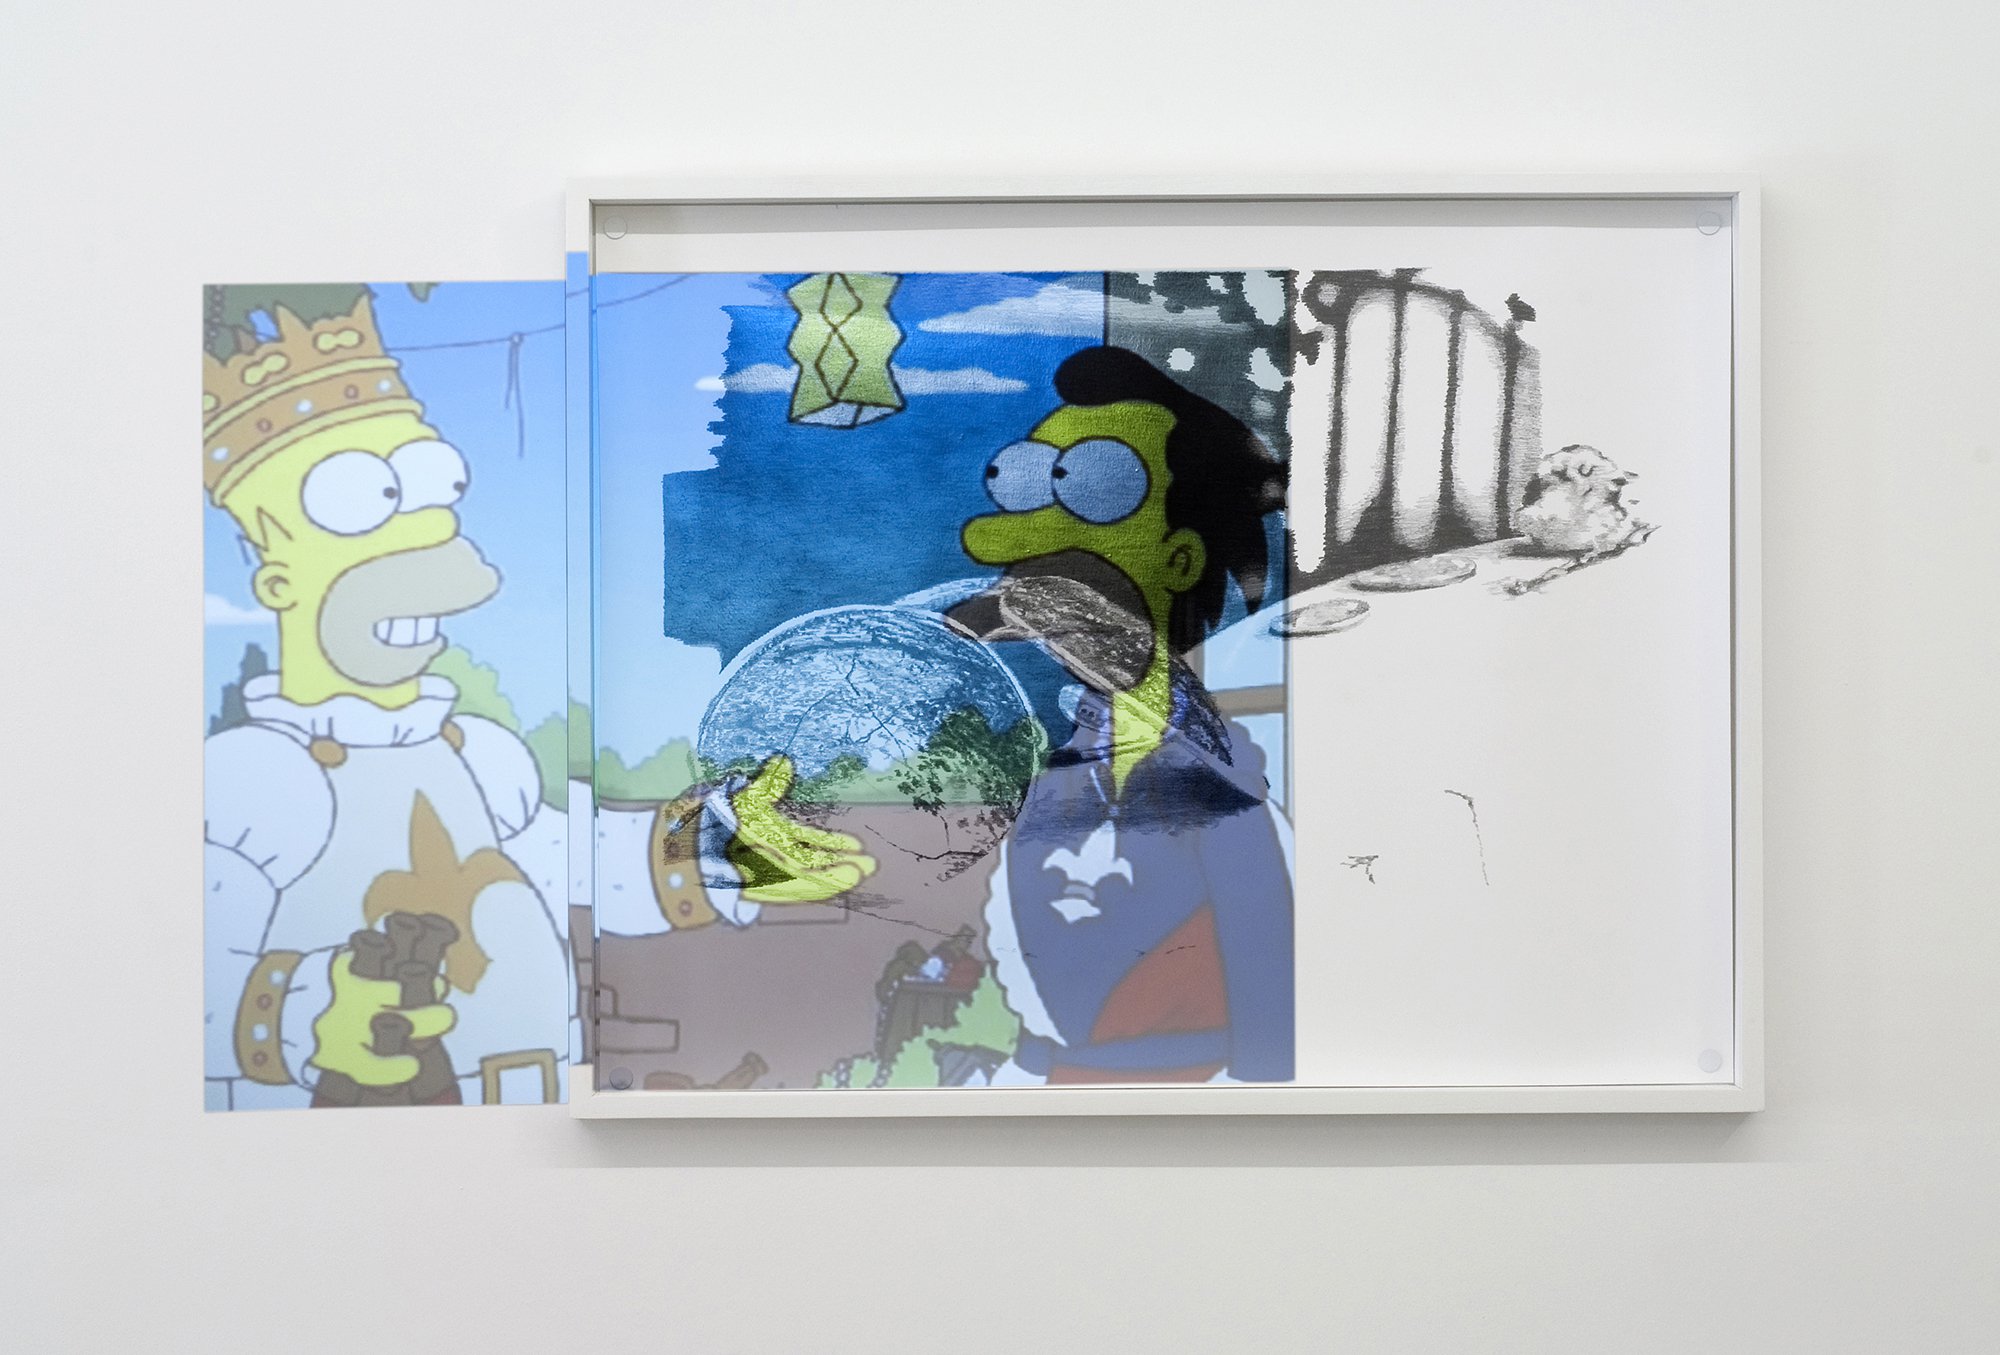 Mark Aerial Waller, Offering Transmissions #5, graphite on paper, projection of recent episode of The Simpsons, 100.5 x 78.5 cm, 2011-2012. Installation view, Offering Transmissions, Rodeo, Istanbul, 2012